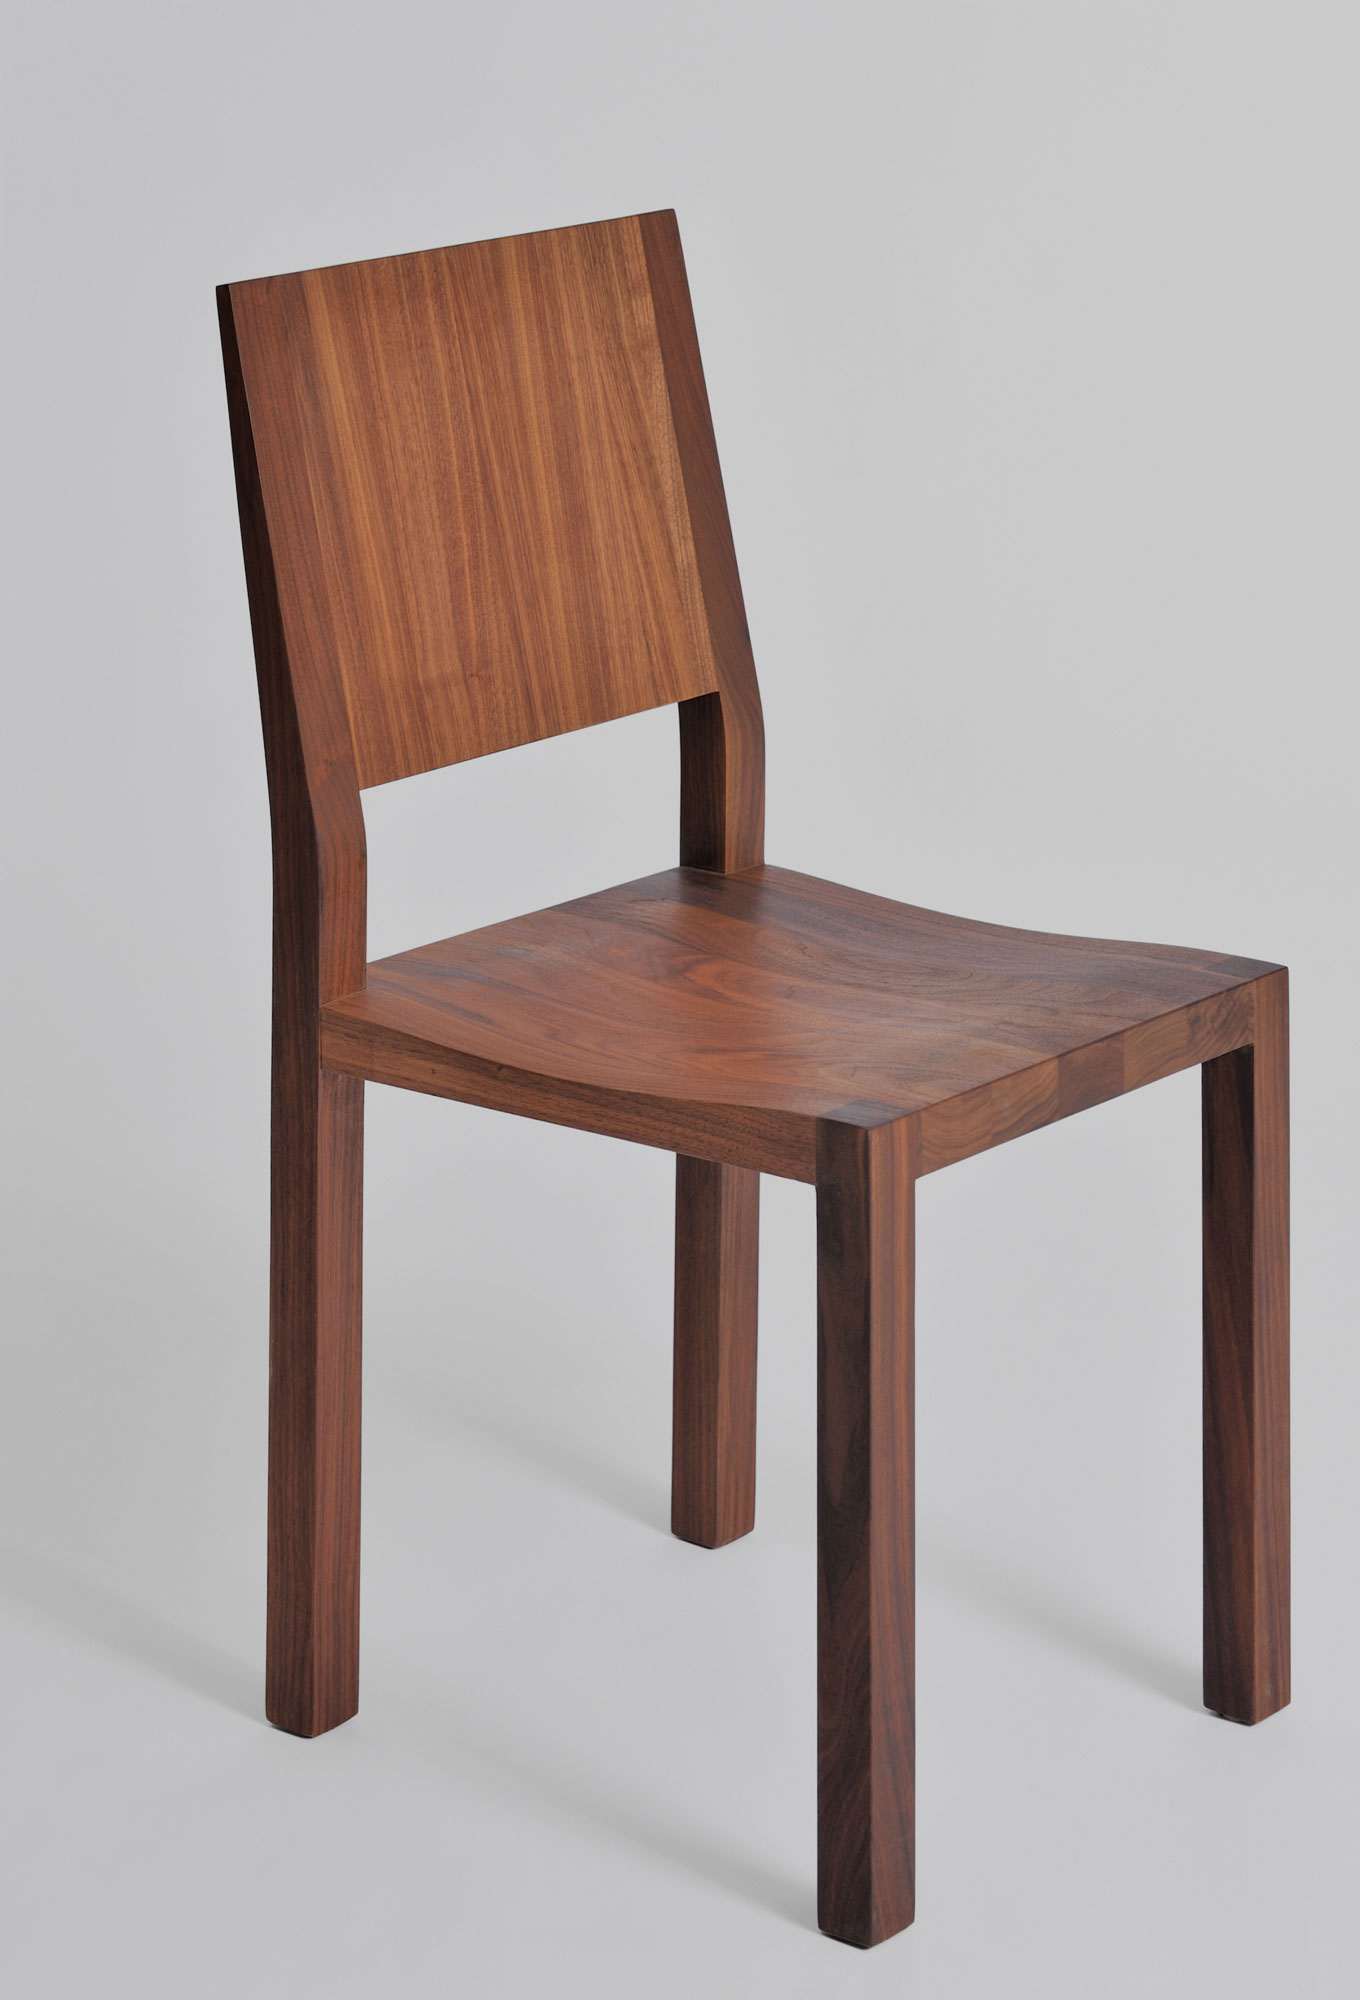 Solid Wood Chair TAU 1 custom made in solid wood by vitamin design